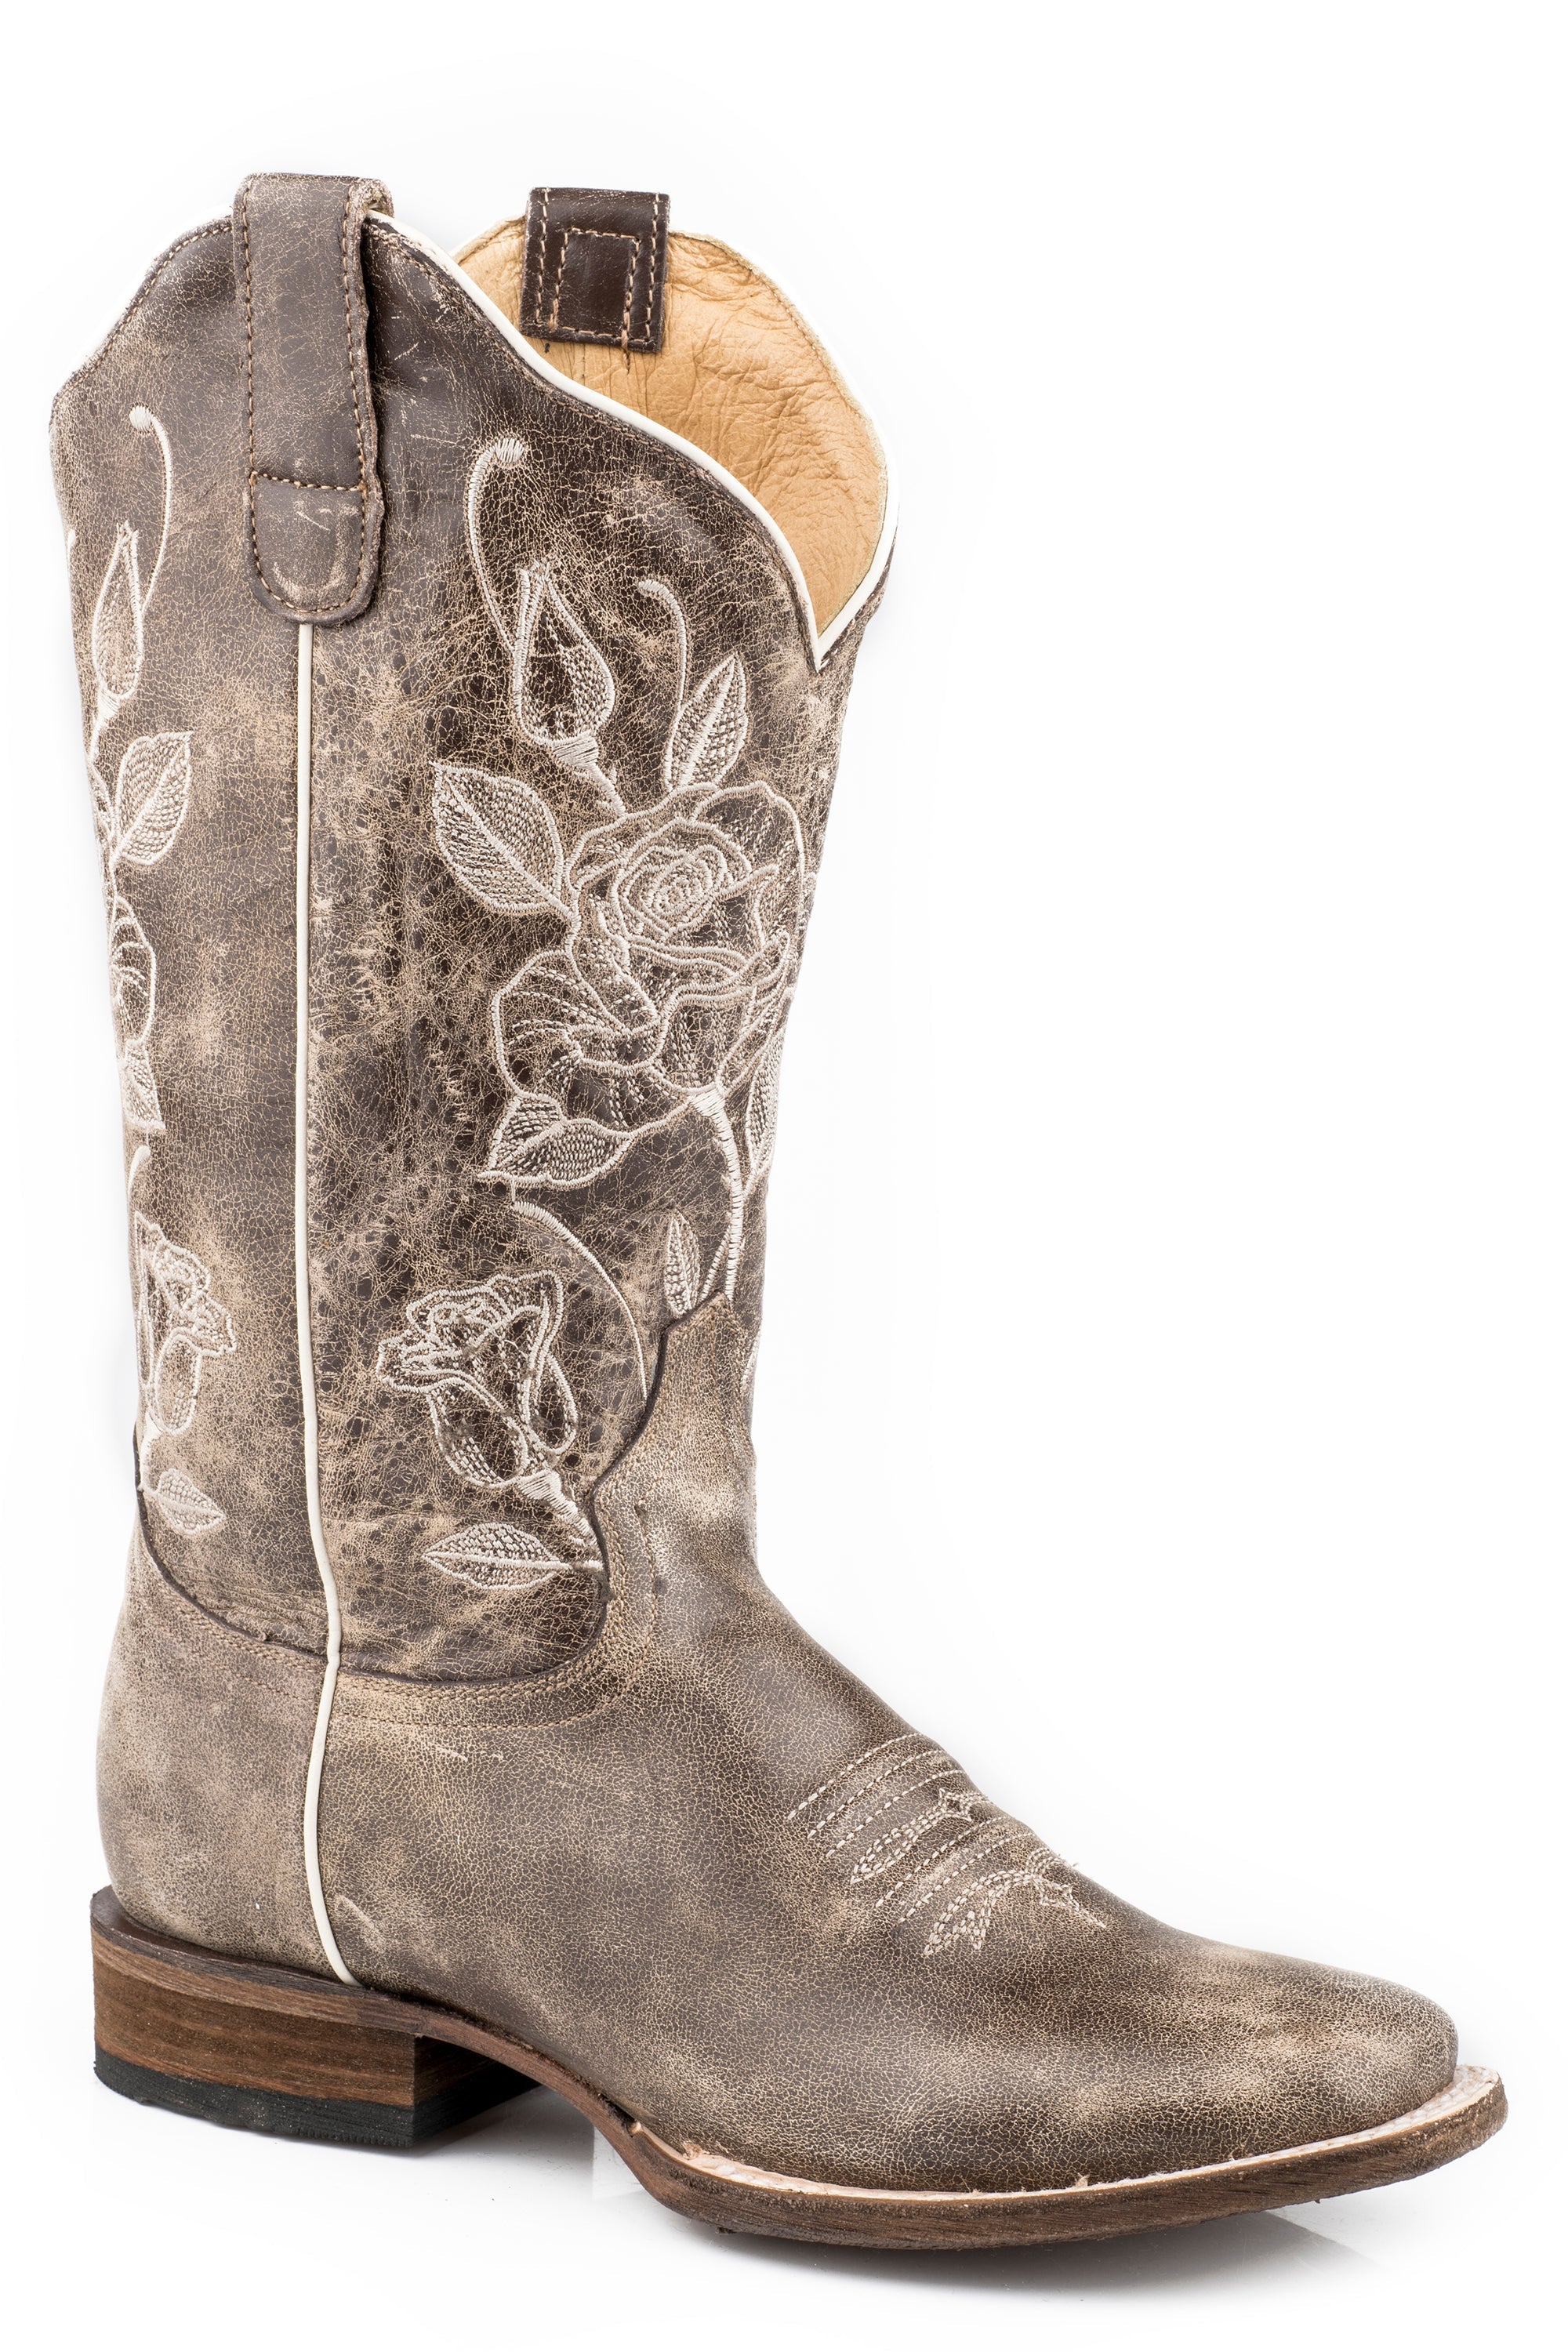 Roper Womens Vintage Brown Leather Vamp  Shaft Flextra Boot With Floral Embroidery On Shaft